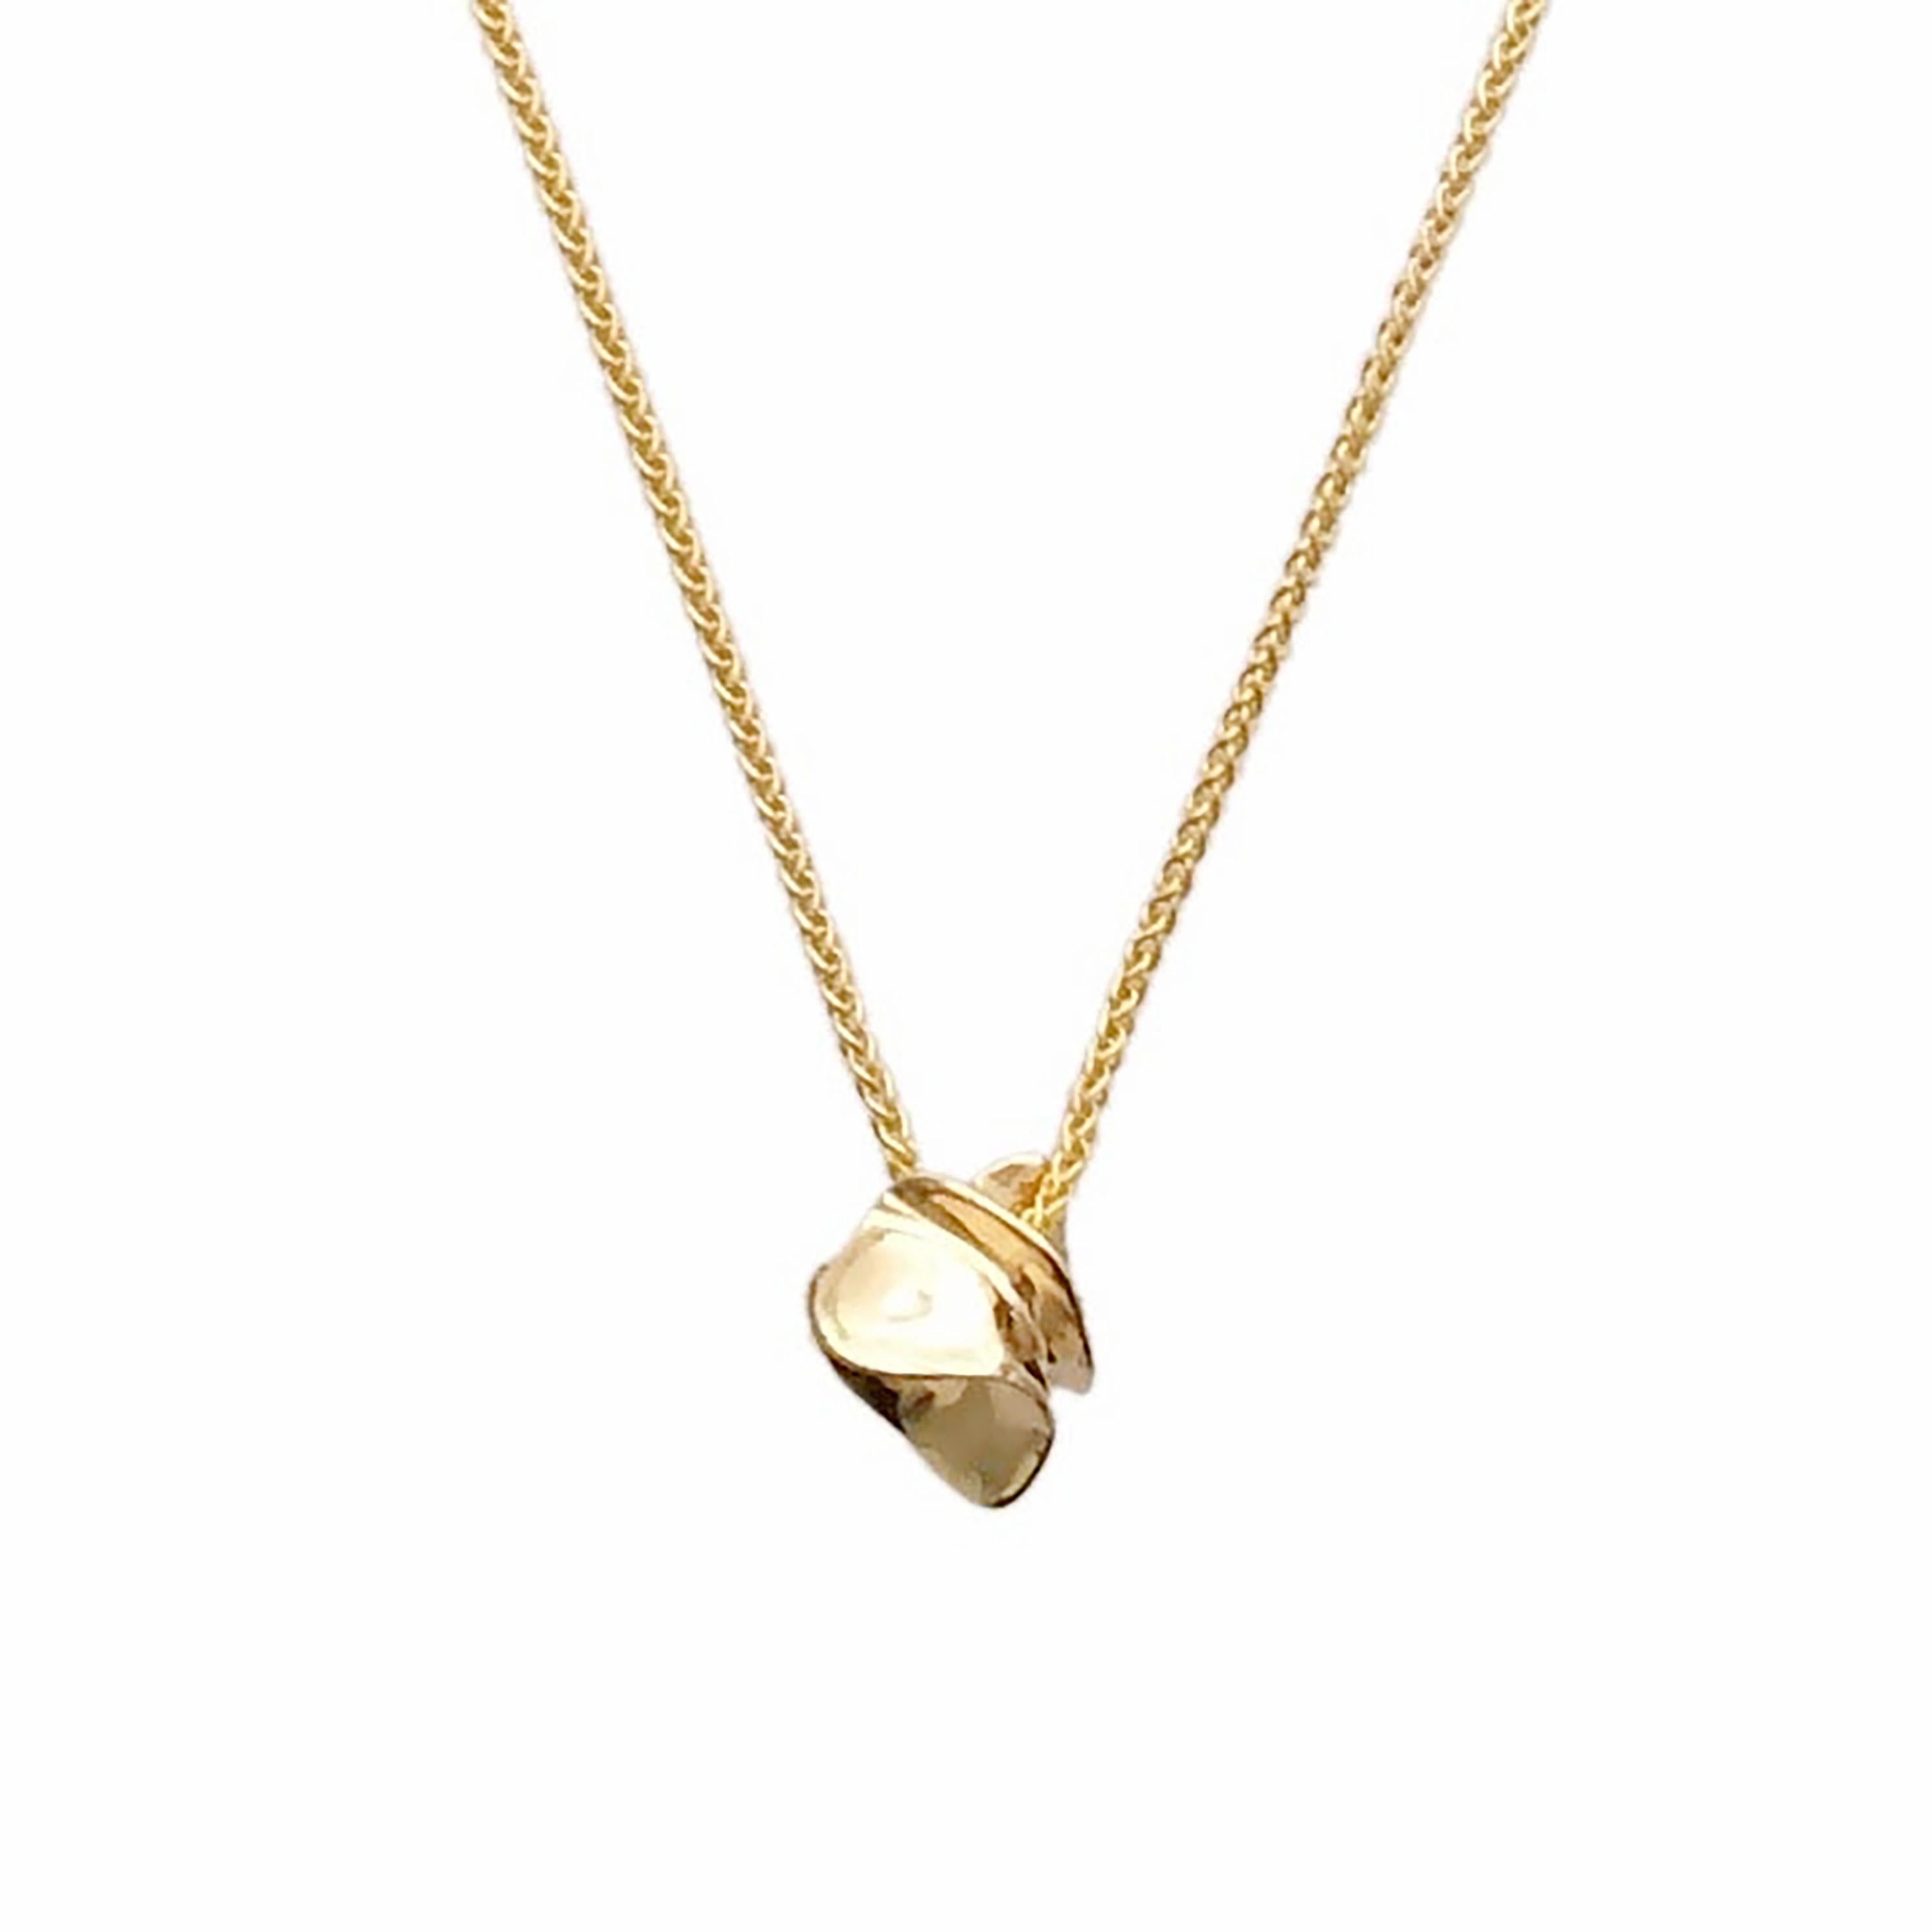 Sculptural Form Contemporary Necklace 14K Gold with Wheat Chain For Sale 3